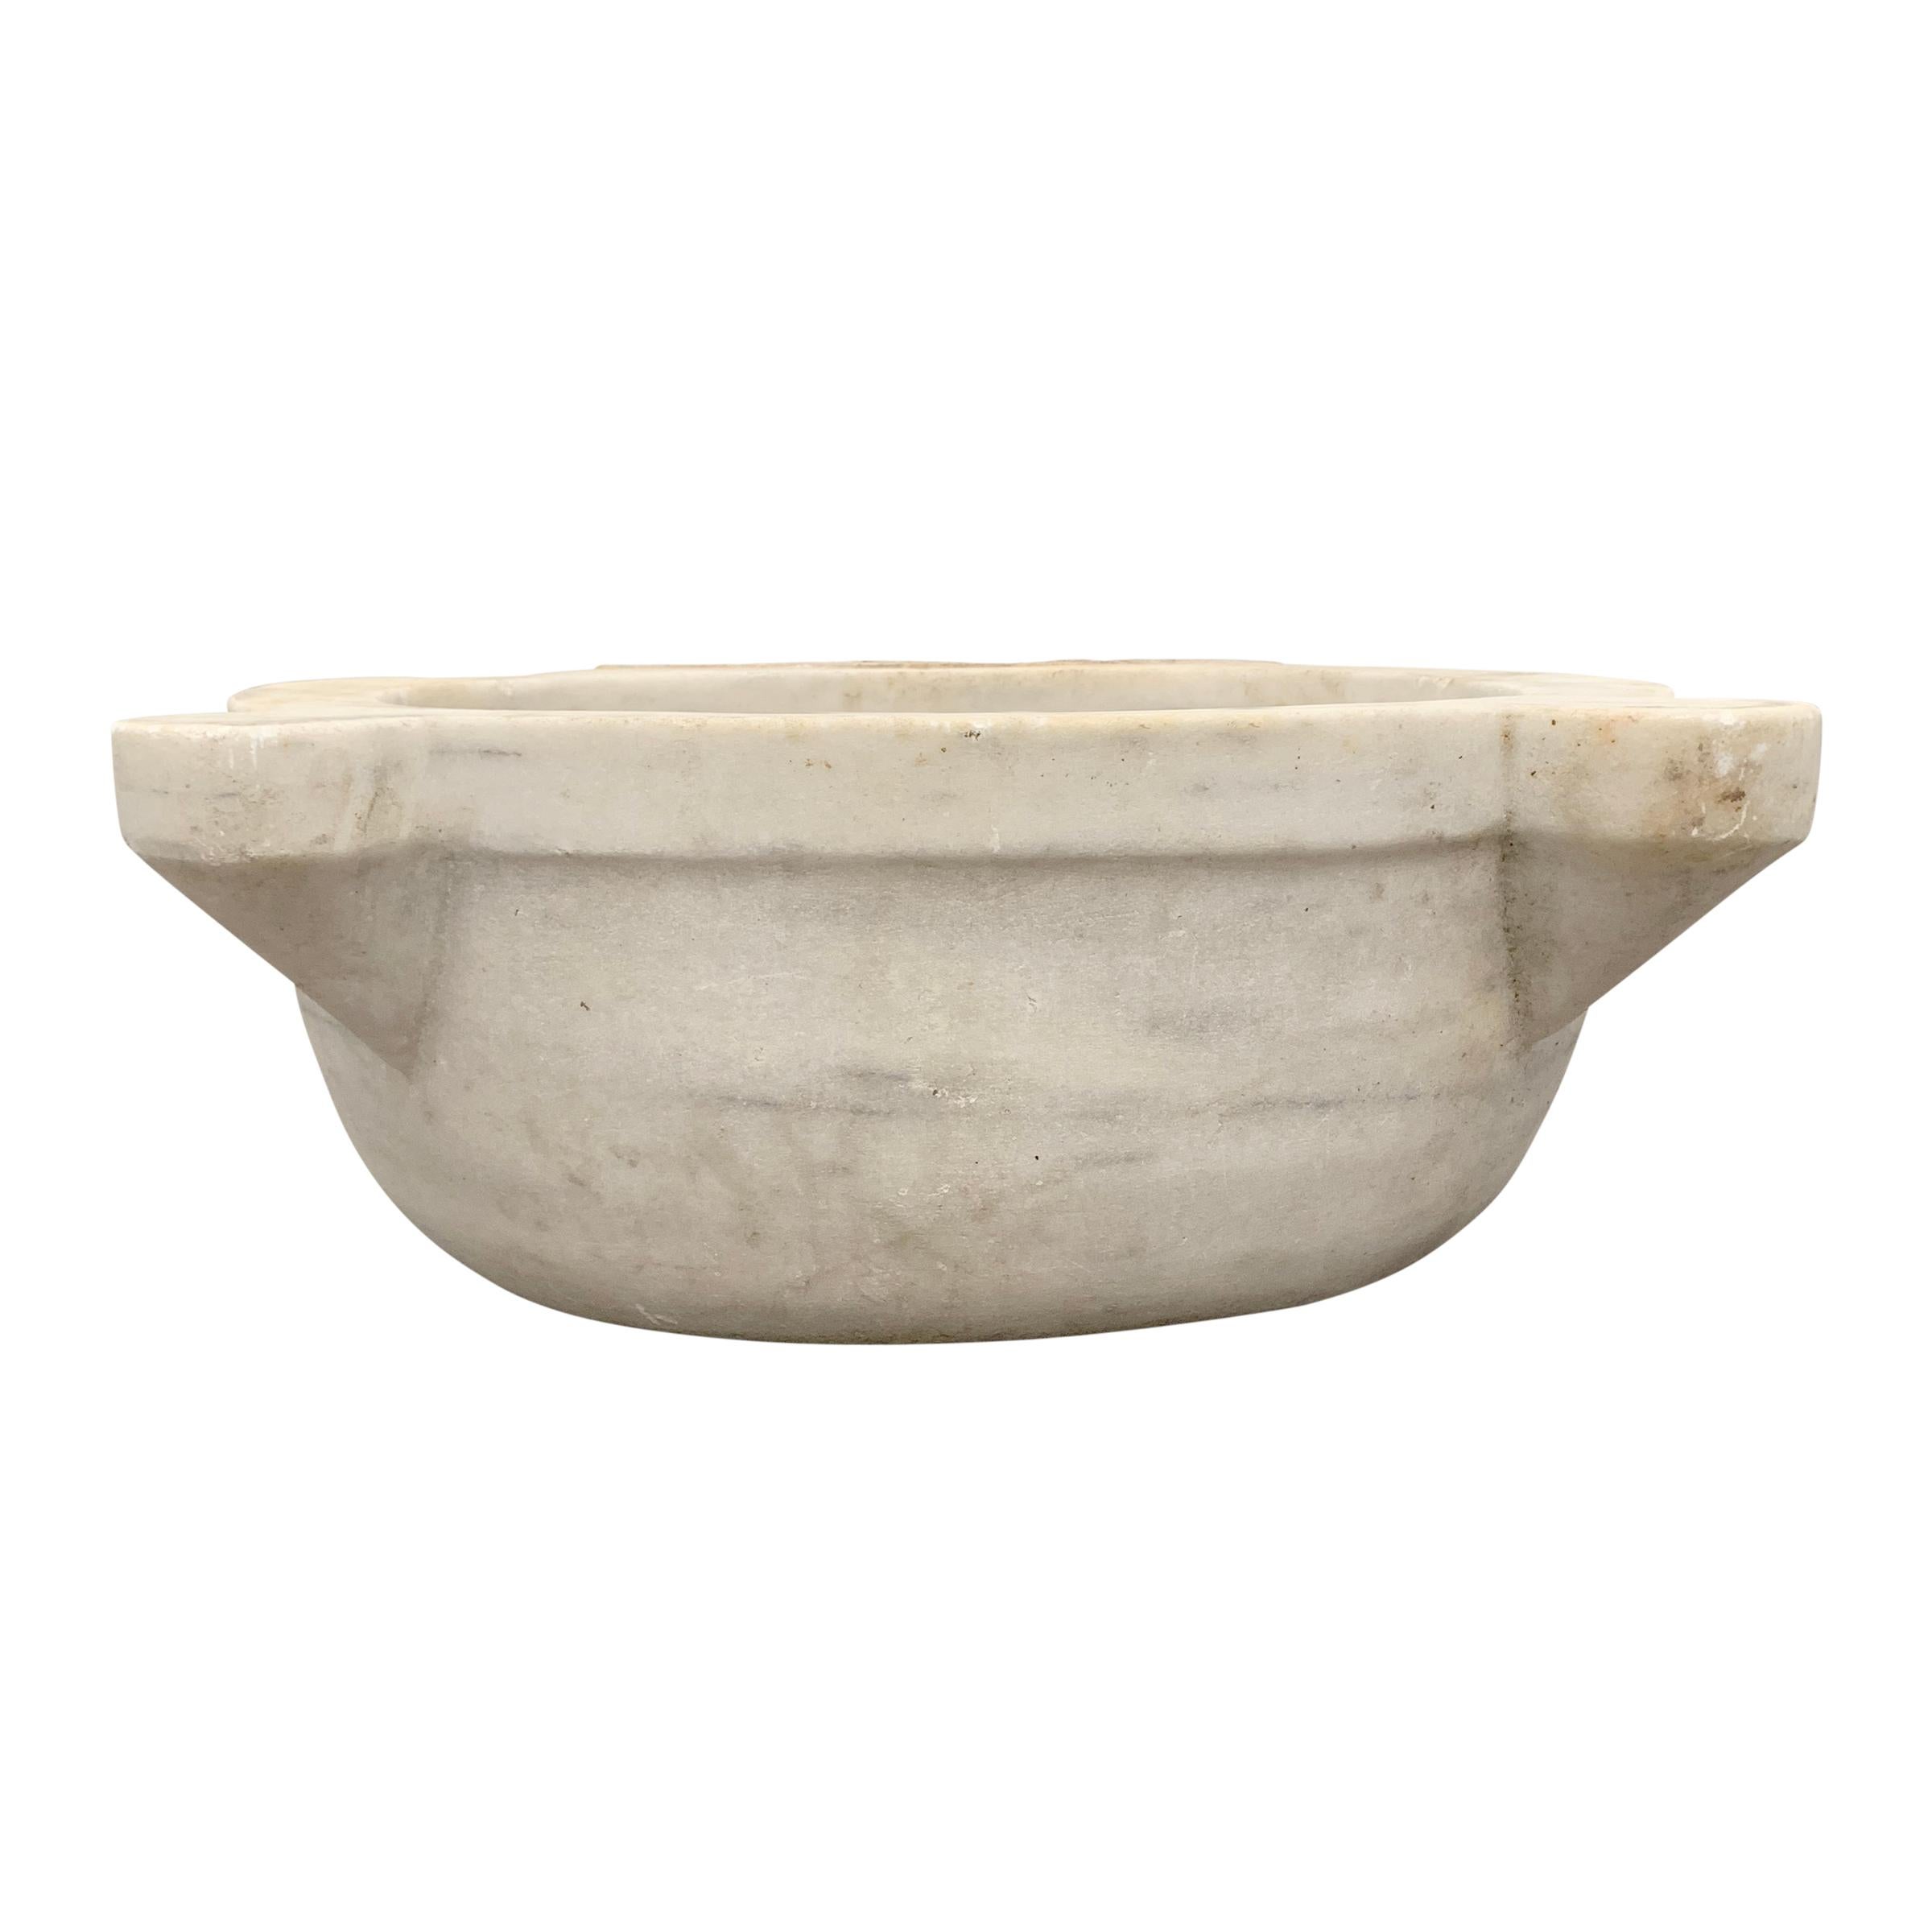 A wonderful 18th century Turkish Hammam carved white marble sink vessel with a wonderfully worn finish. A drain could be drilled in the bottom to convert into a sink.

Interior dimension: 17.5 in. W x 13.75 in. D x 8 in. H.